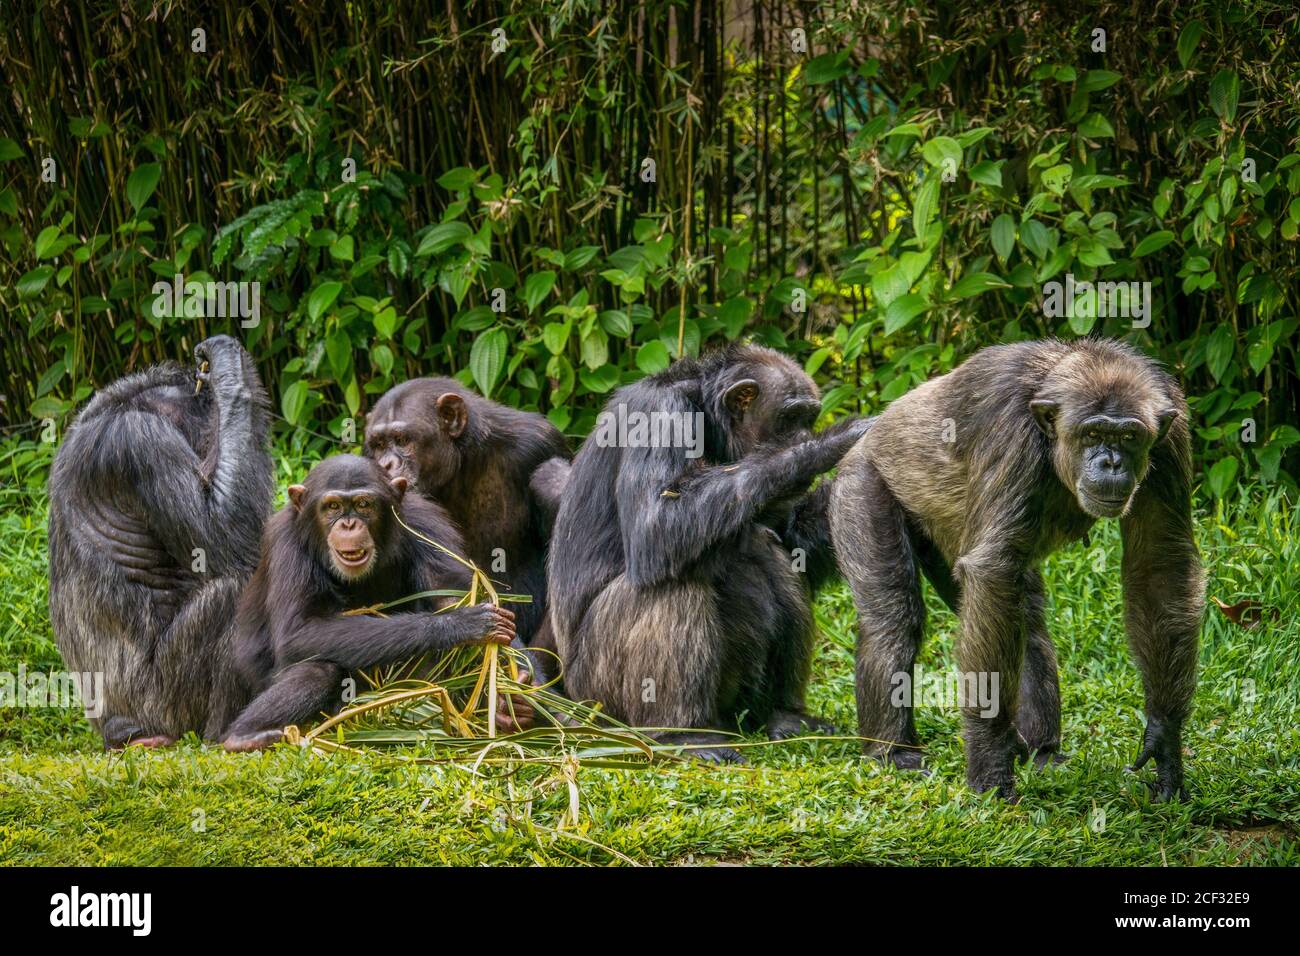 Interesting animal behavior, with focus on the adult male chimpanzee on right having his buttocks groomed. Stock Photo